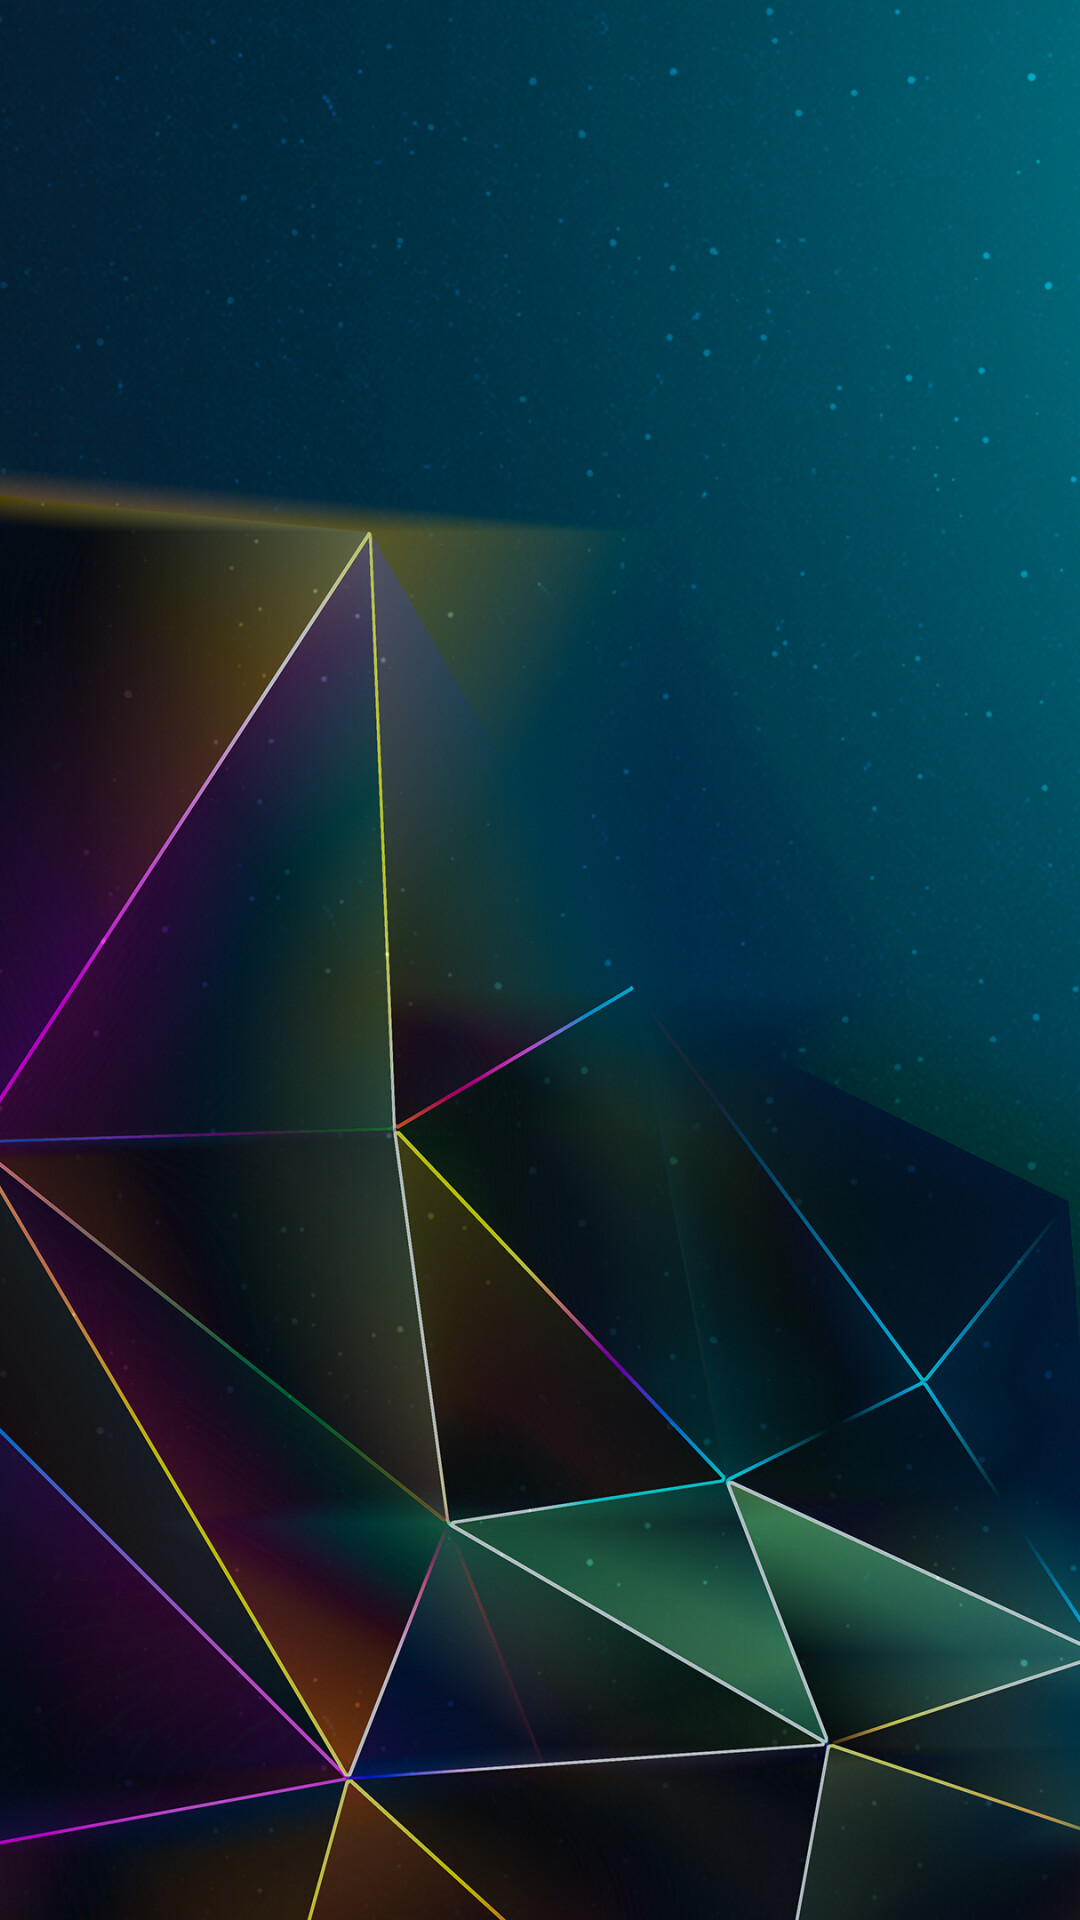 Triangle: Abstract ornament, Complementary angles, Lines structure. 1080x1920 Full HD Background.